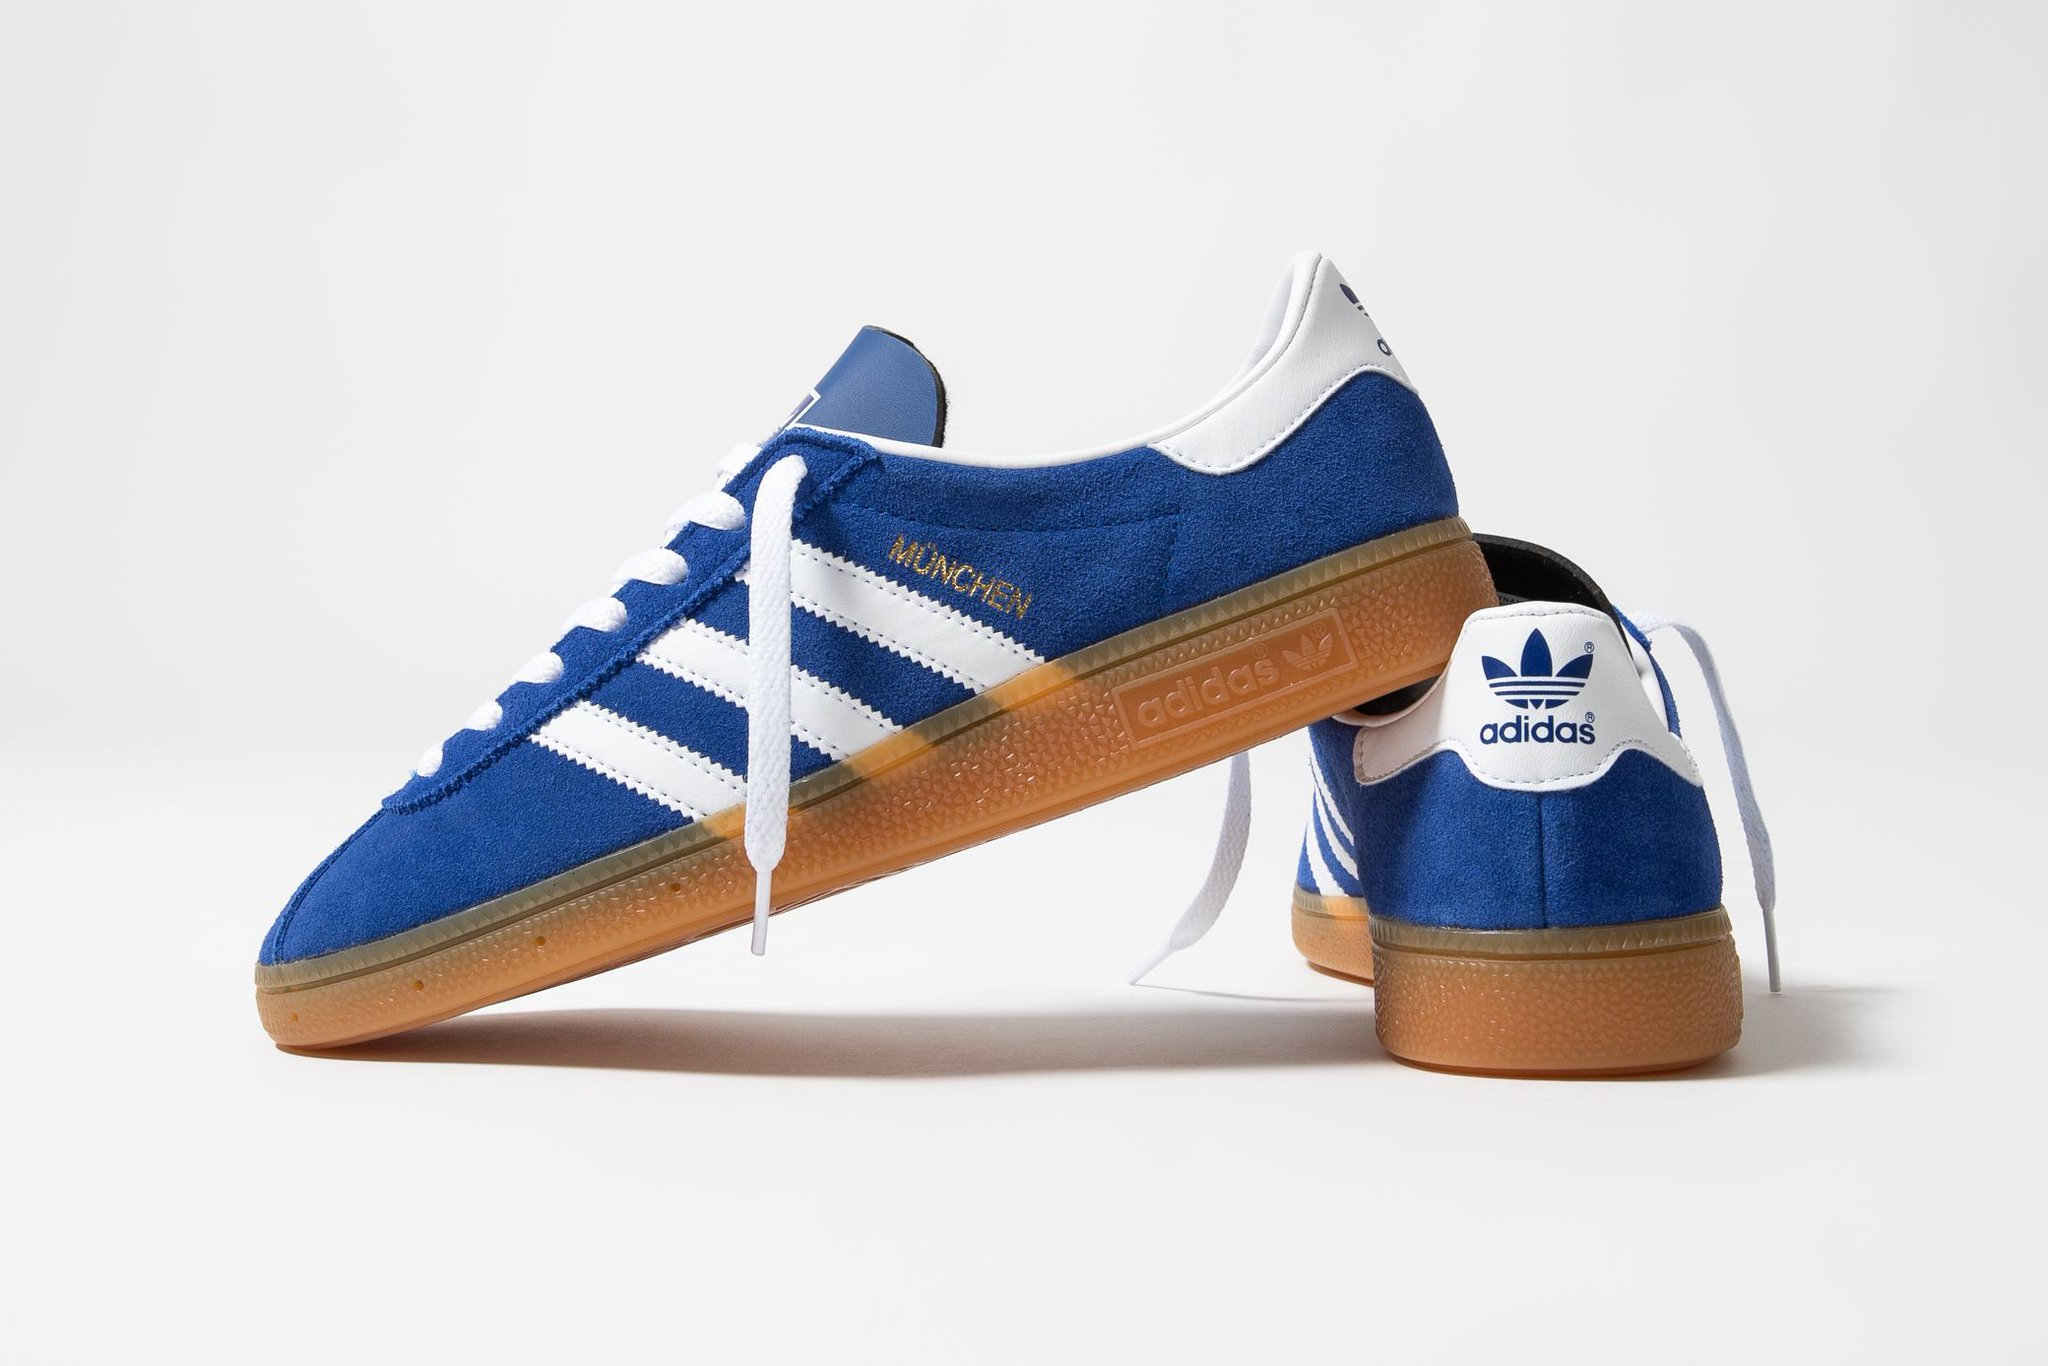 Inhibir Leche Cumplir Titolo na Twitter: "ONLINE NOW 🔥 wear your love for Bavaria with the Adidas  München 🔵 Now available online ➡️ https://t.co/U27nZTN0xe ⁠ sizerun 🏃🏾  UK 6.5 (40) - UK 10.5 (45 1/3)⁠